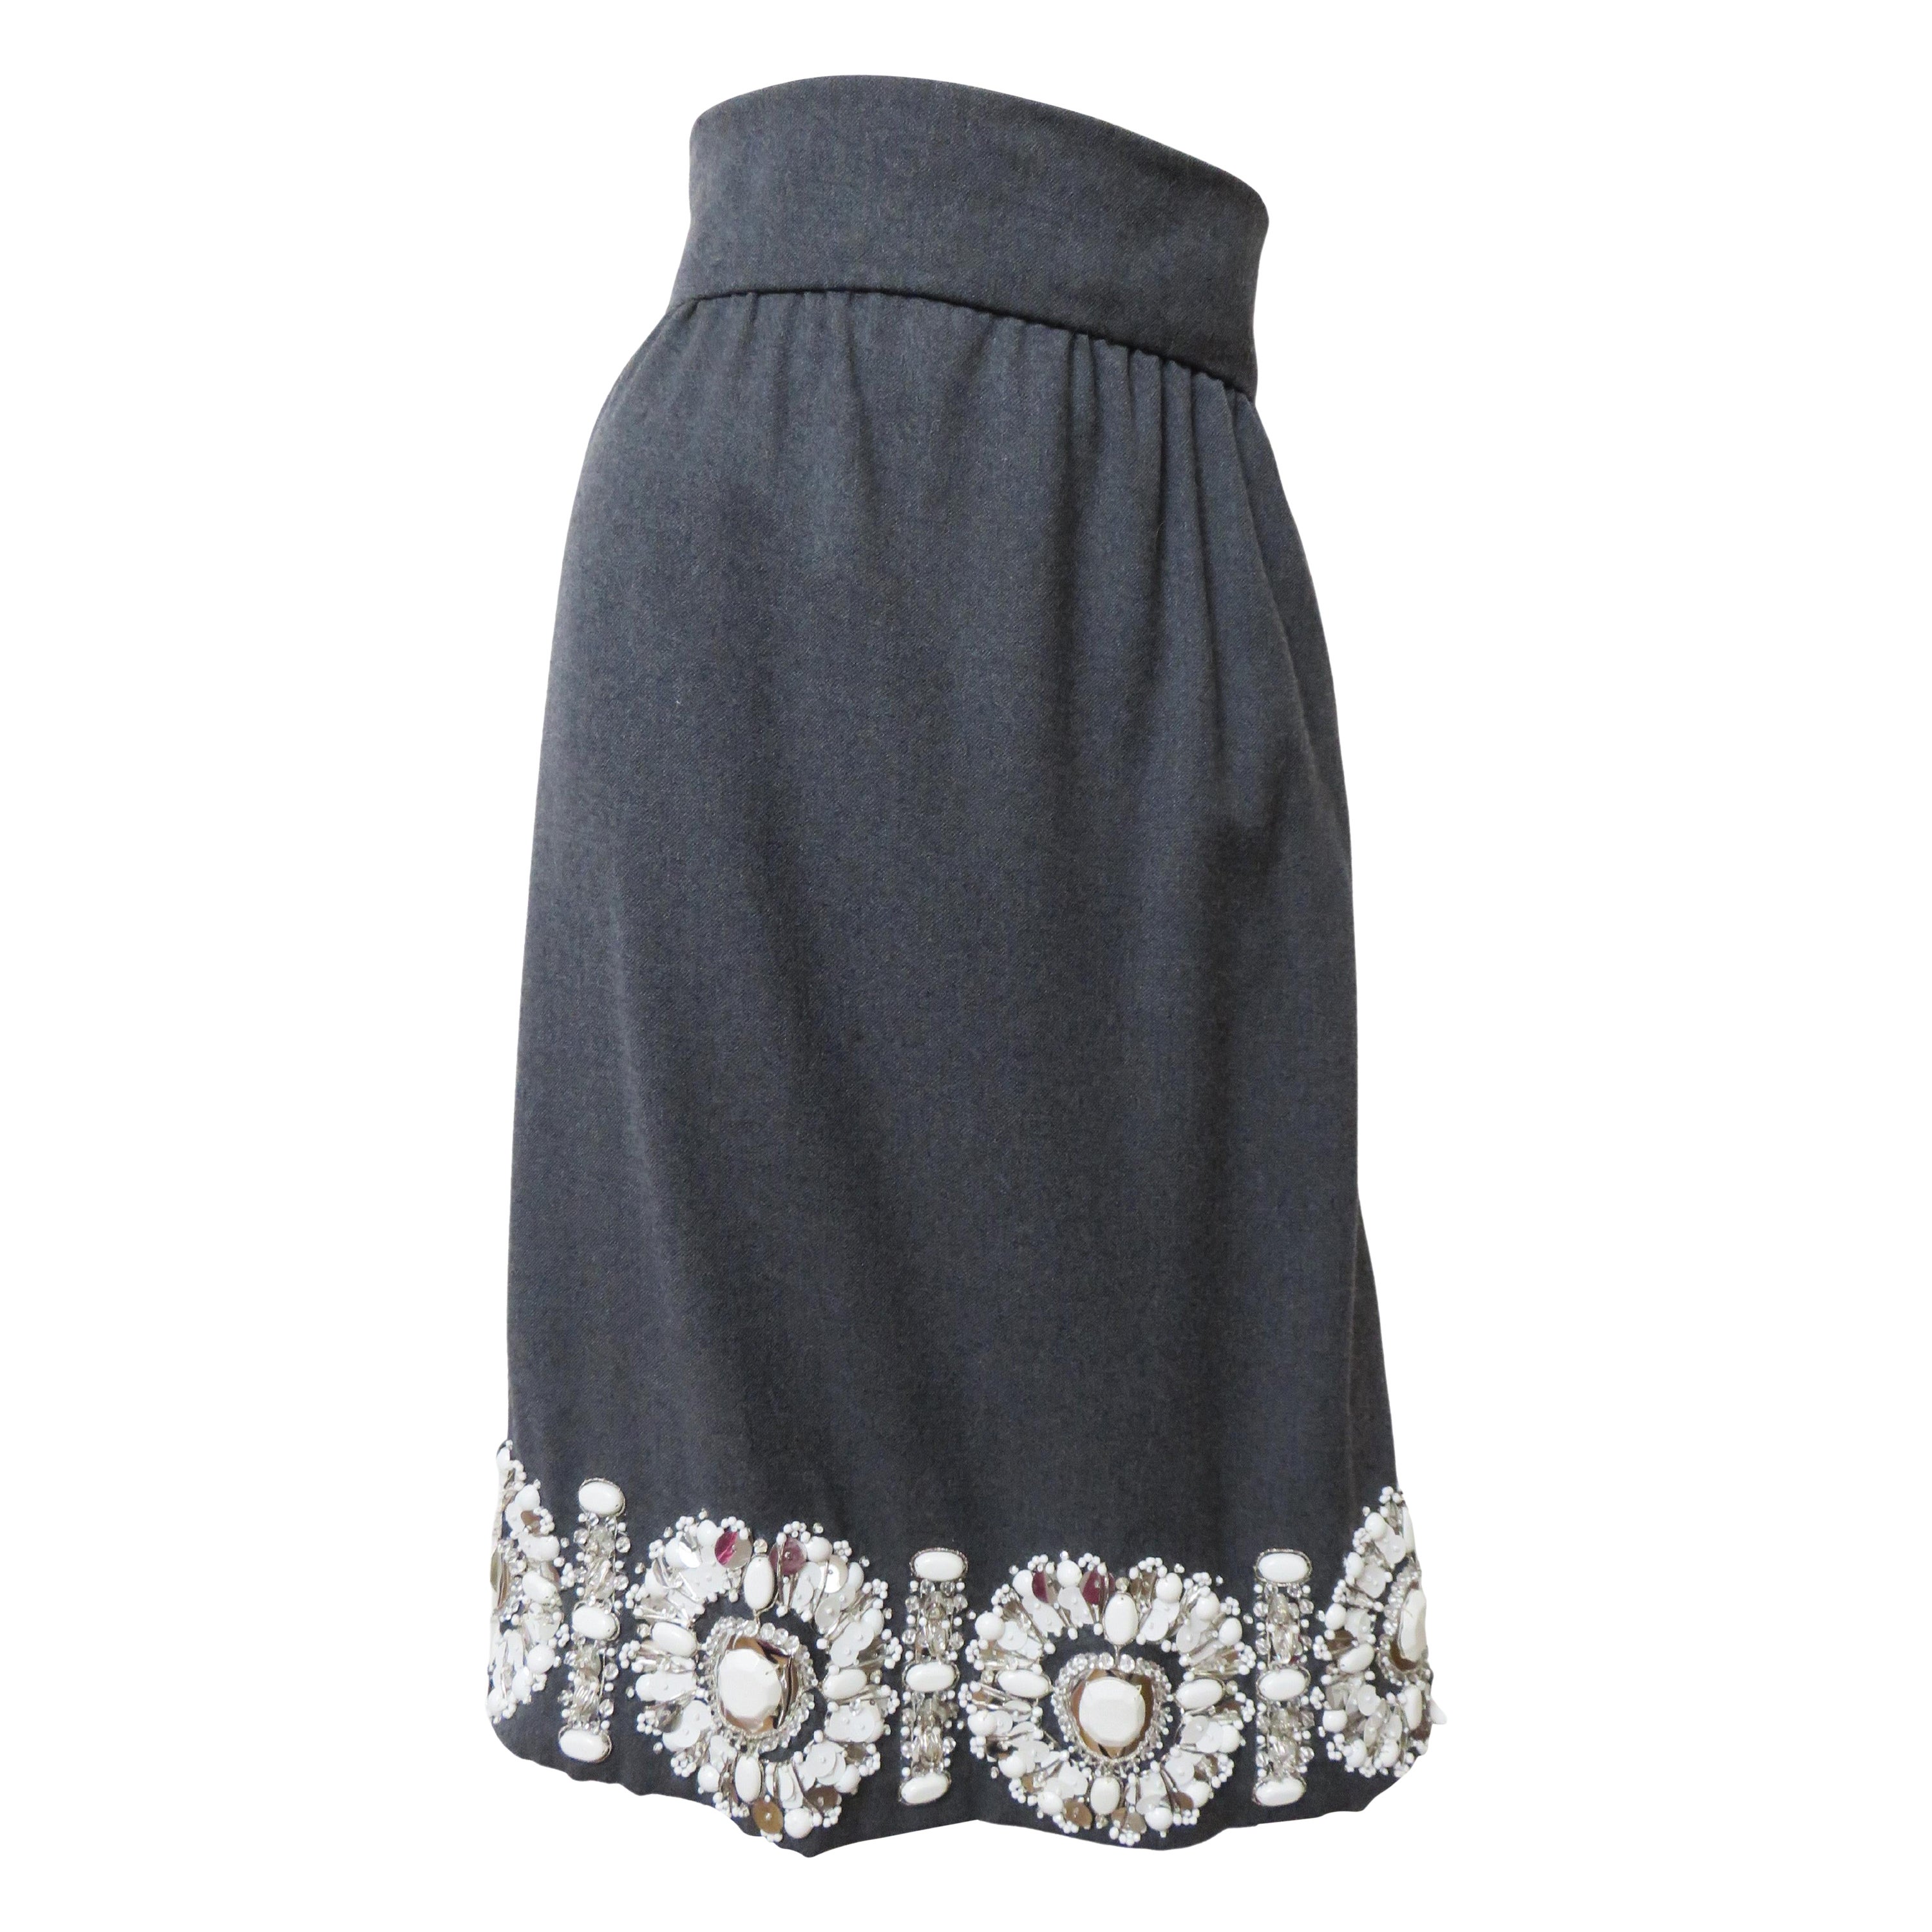 1960s Grey Skirt with Elaborate Bead Trim For Sale